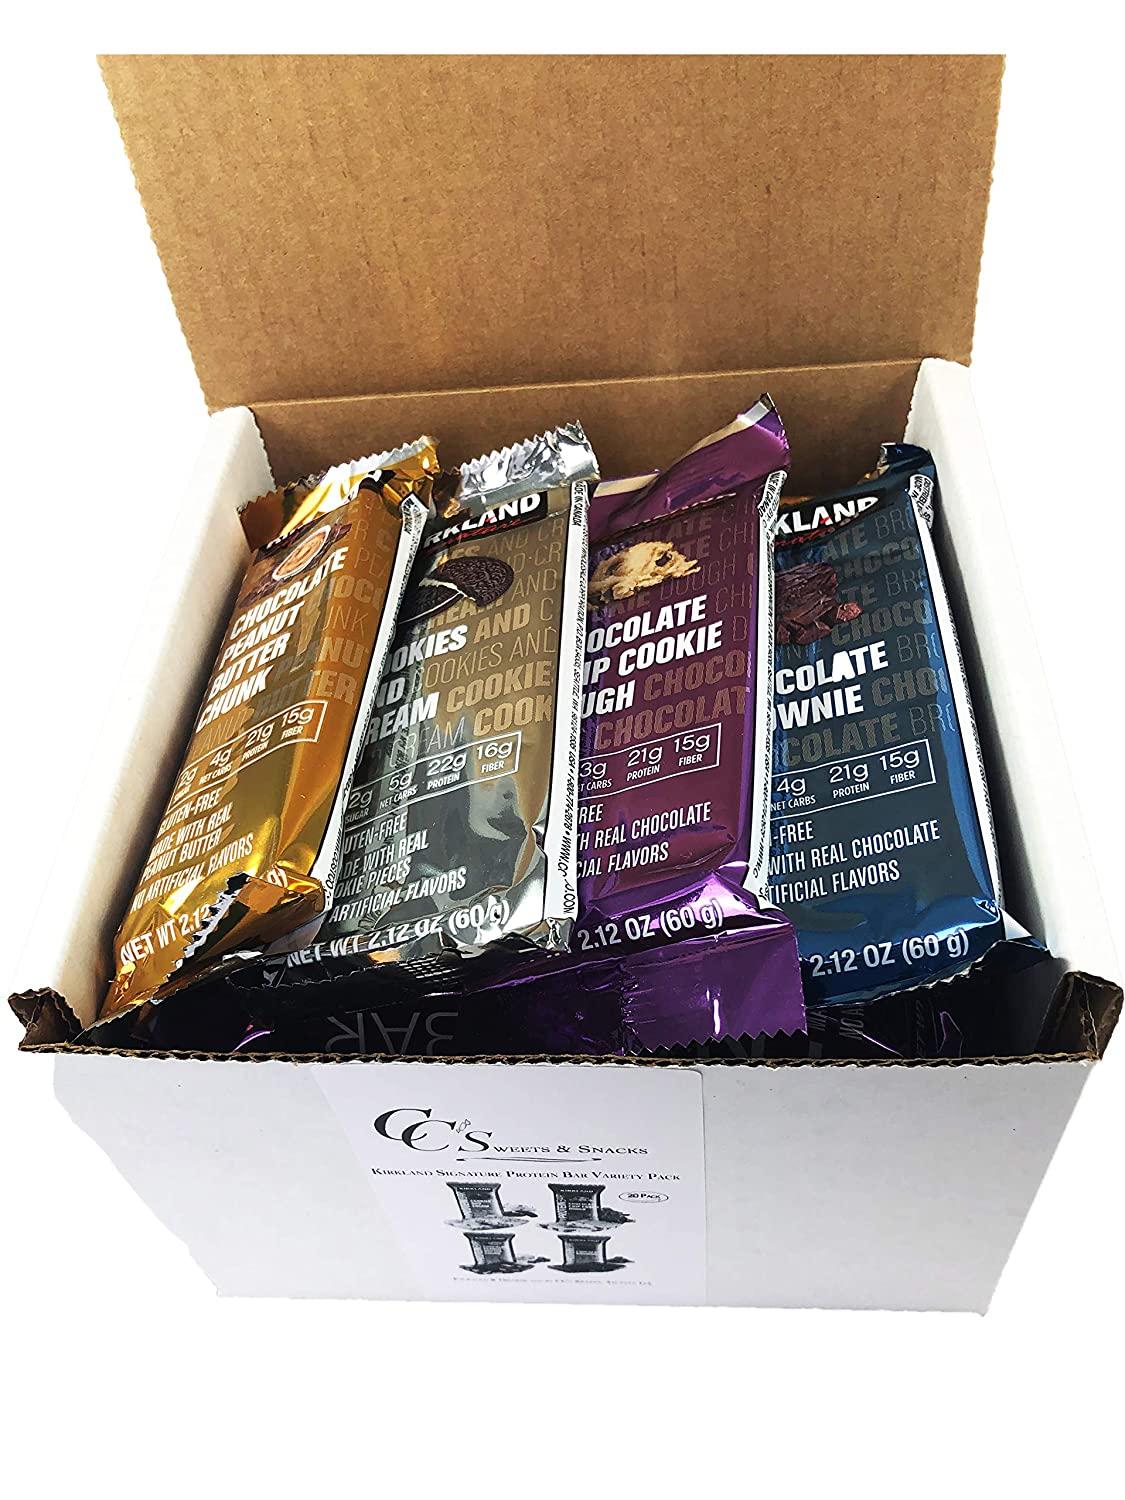  Kirkland Signature Protein Bar Variety Pack 20 Count Chocolate  Peanut Butter Chunk & Cookies and Cream Gluten Free 21-22g of Protein 2g  Sugar No Artificial Flavors Whey Protein Isolate : Grocery